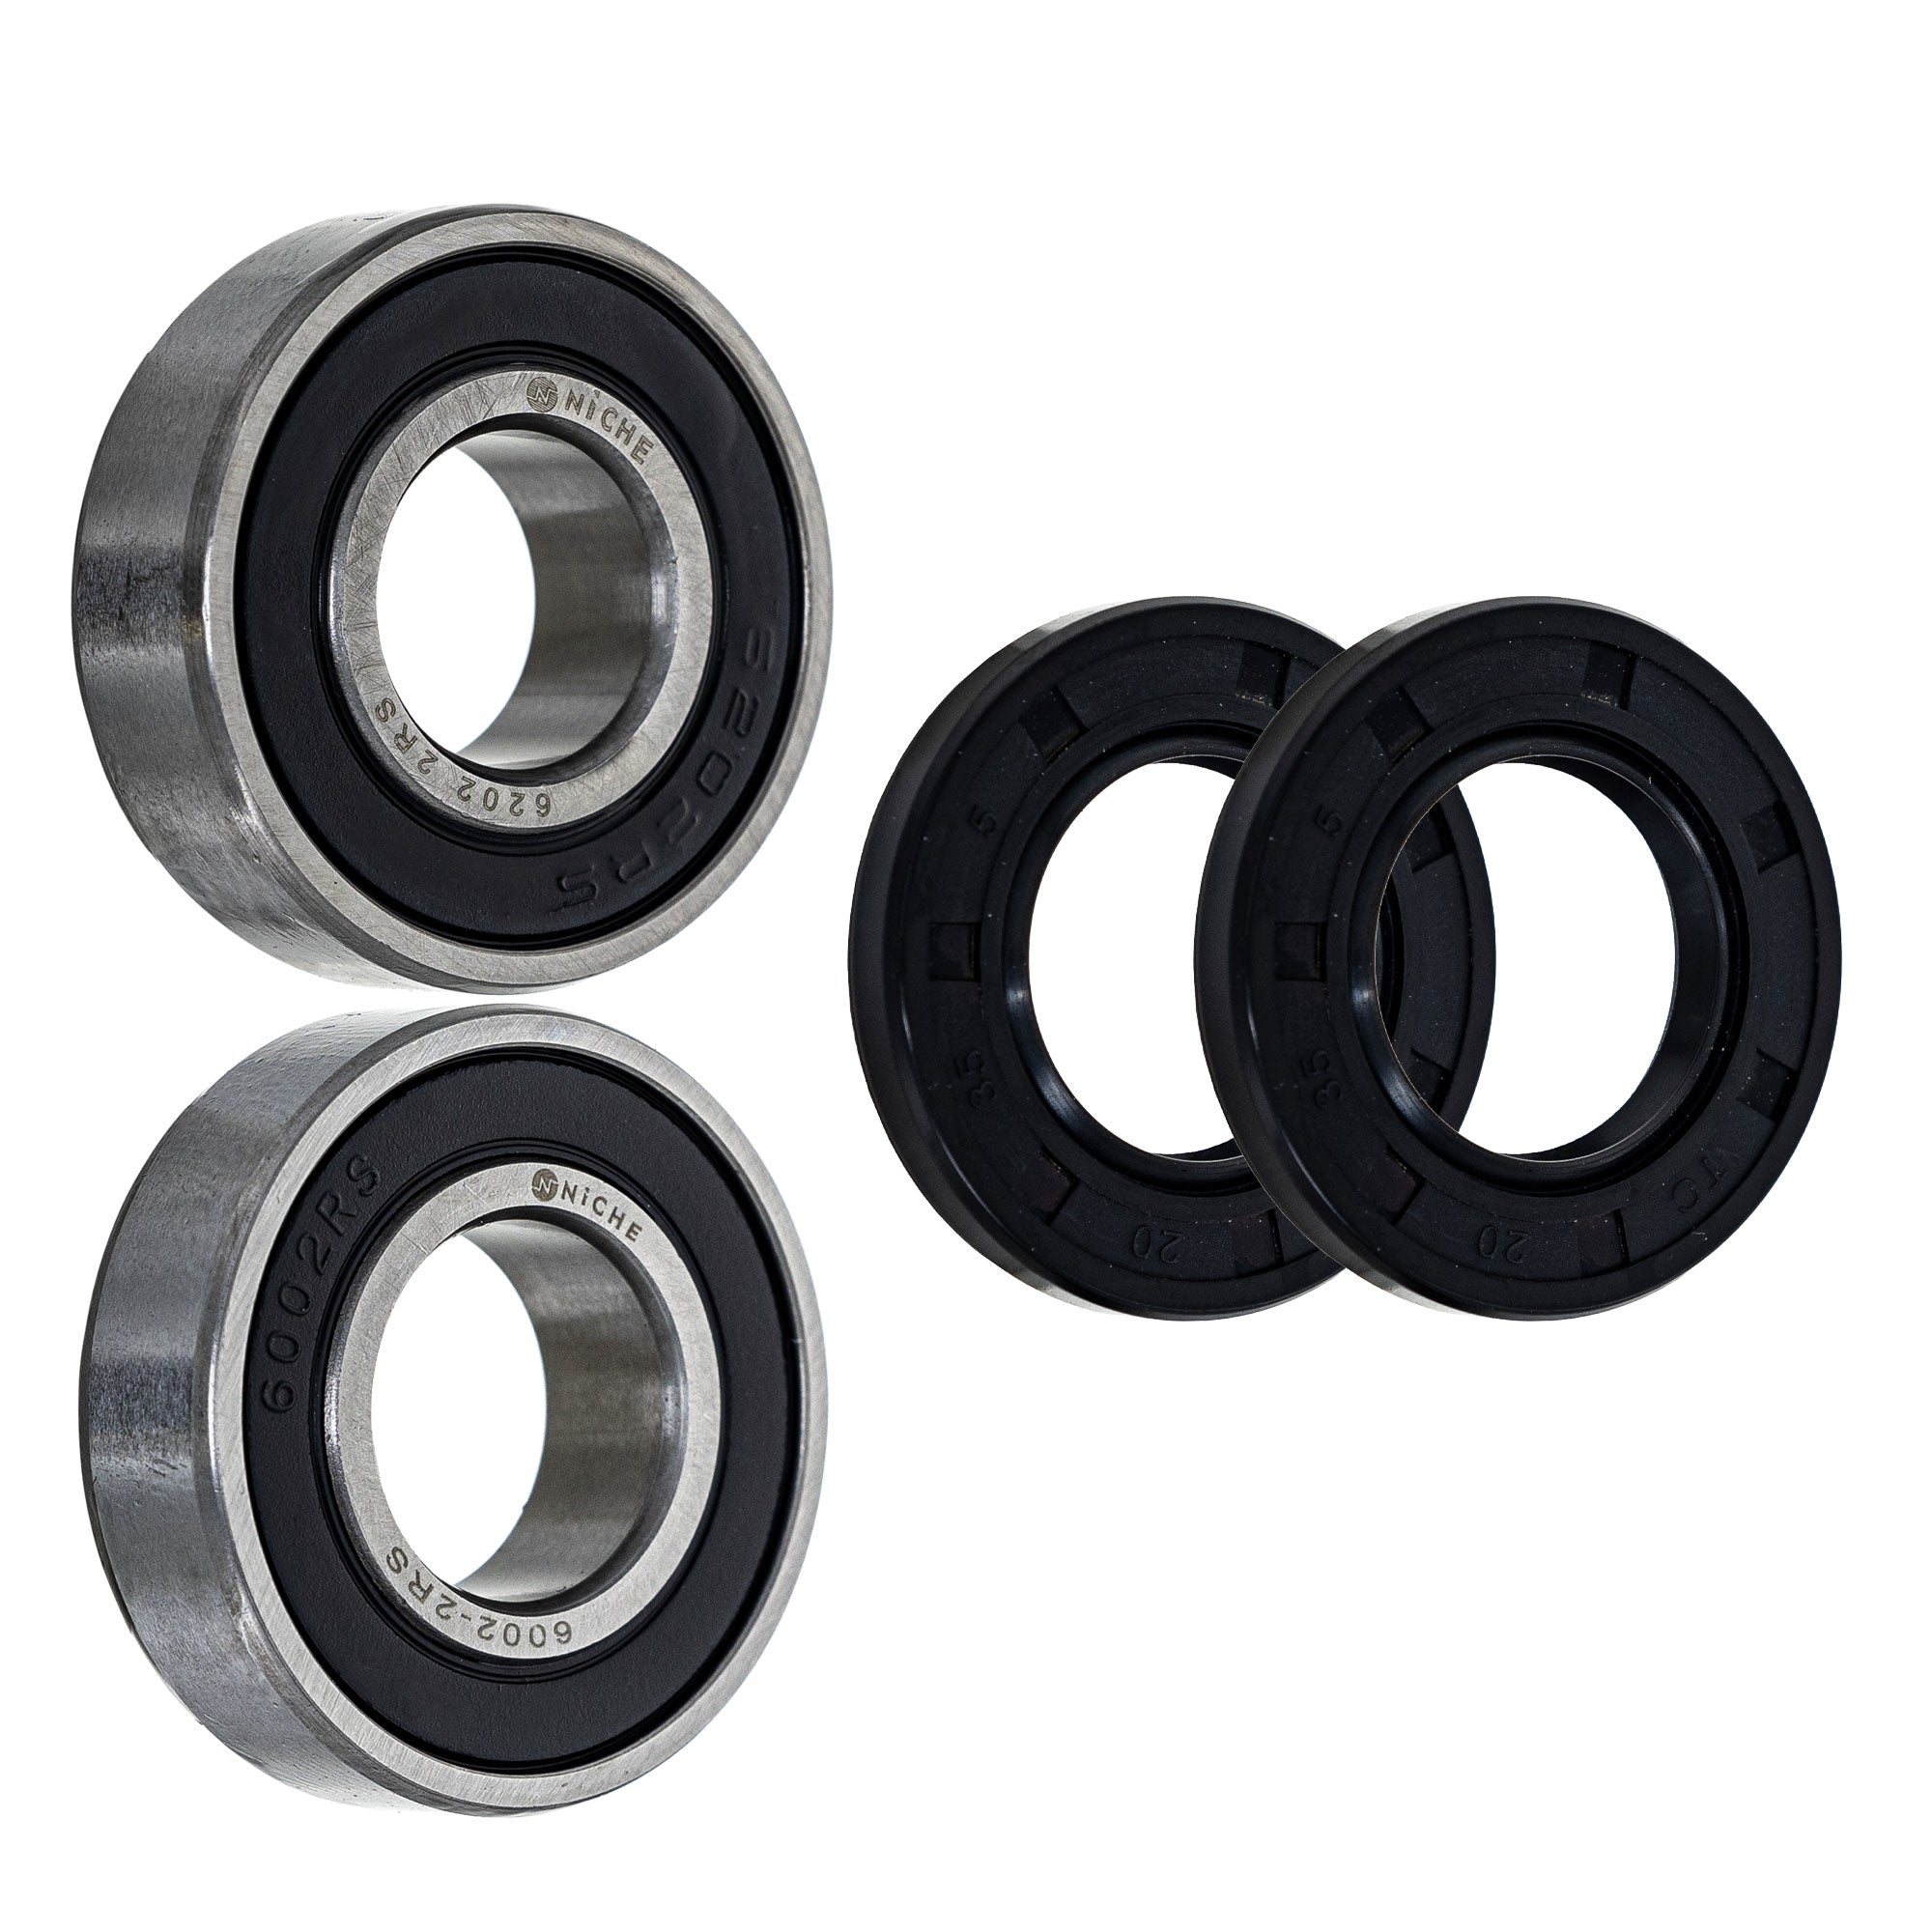 Wheel Bearing Seal Kit for zOTHER Ref No YZ85 YZ80 YZ65 RM85 NICHE MK1008945